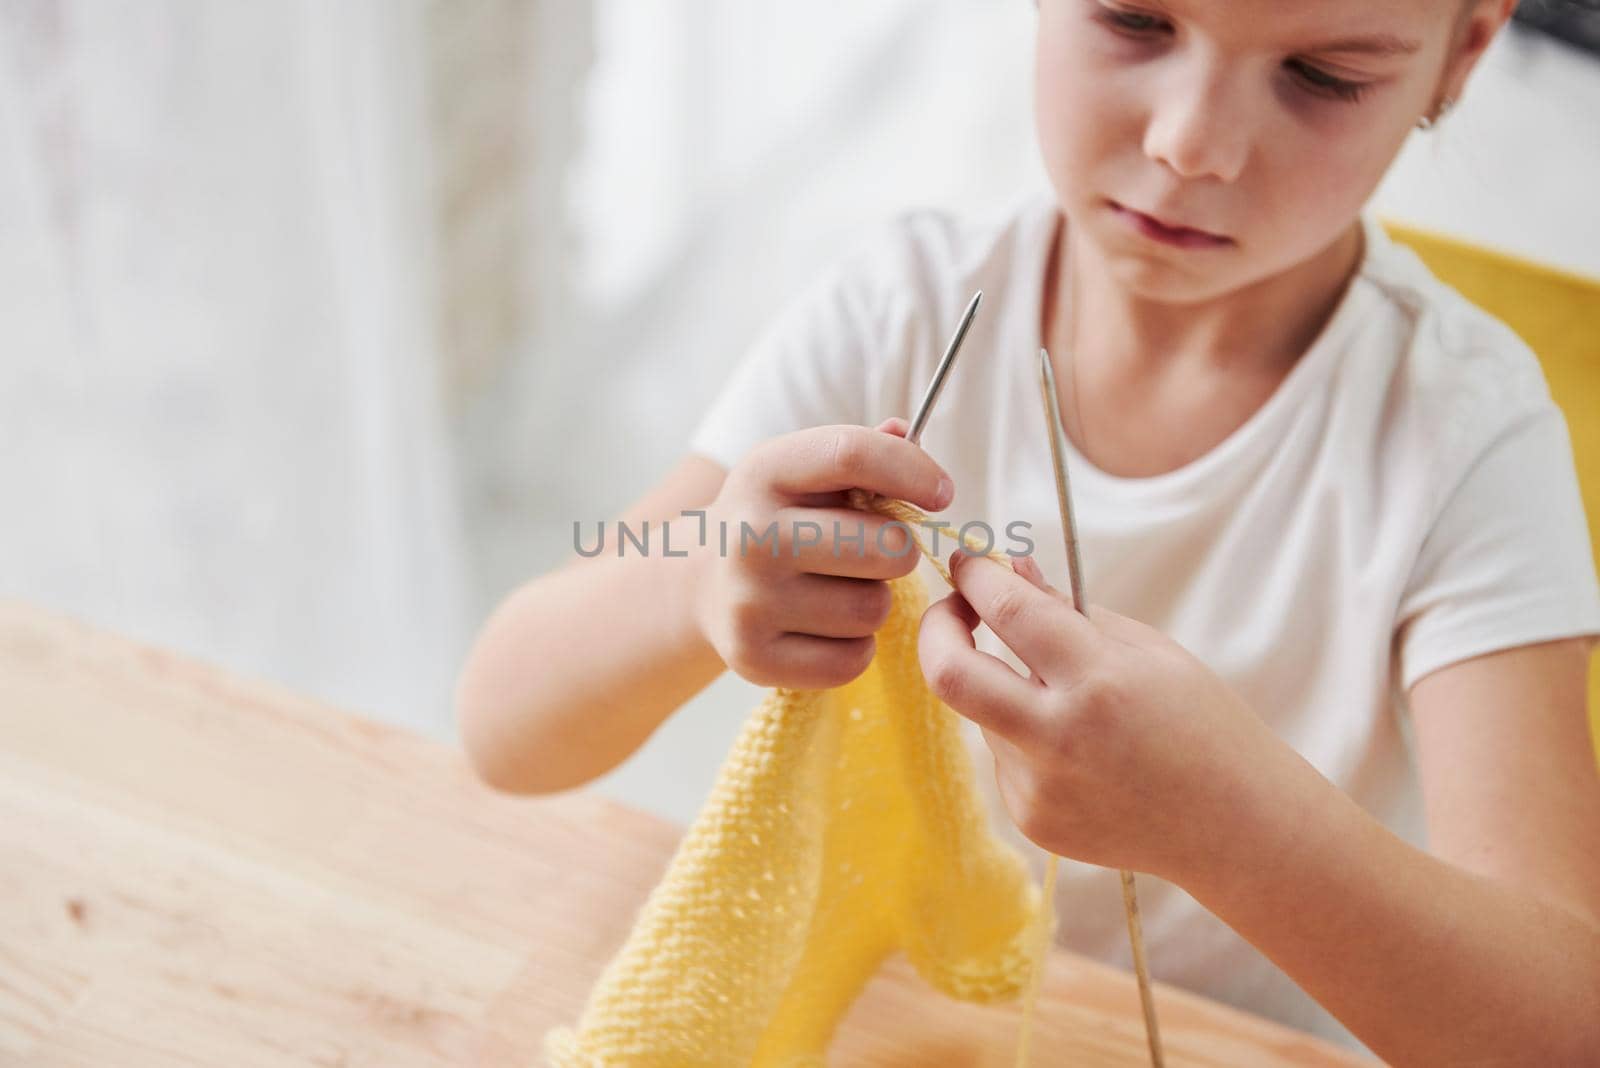 Focused photo. Kid is knitting at home. Cute little girl sitting near the wooden table is learning some new stuff.